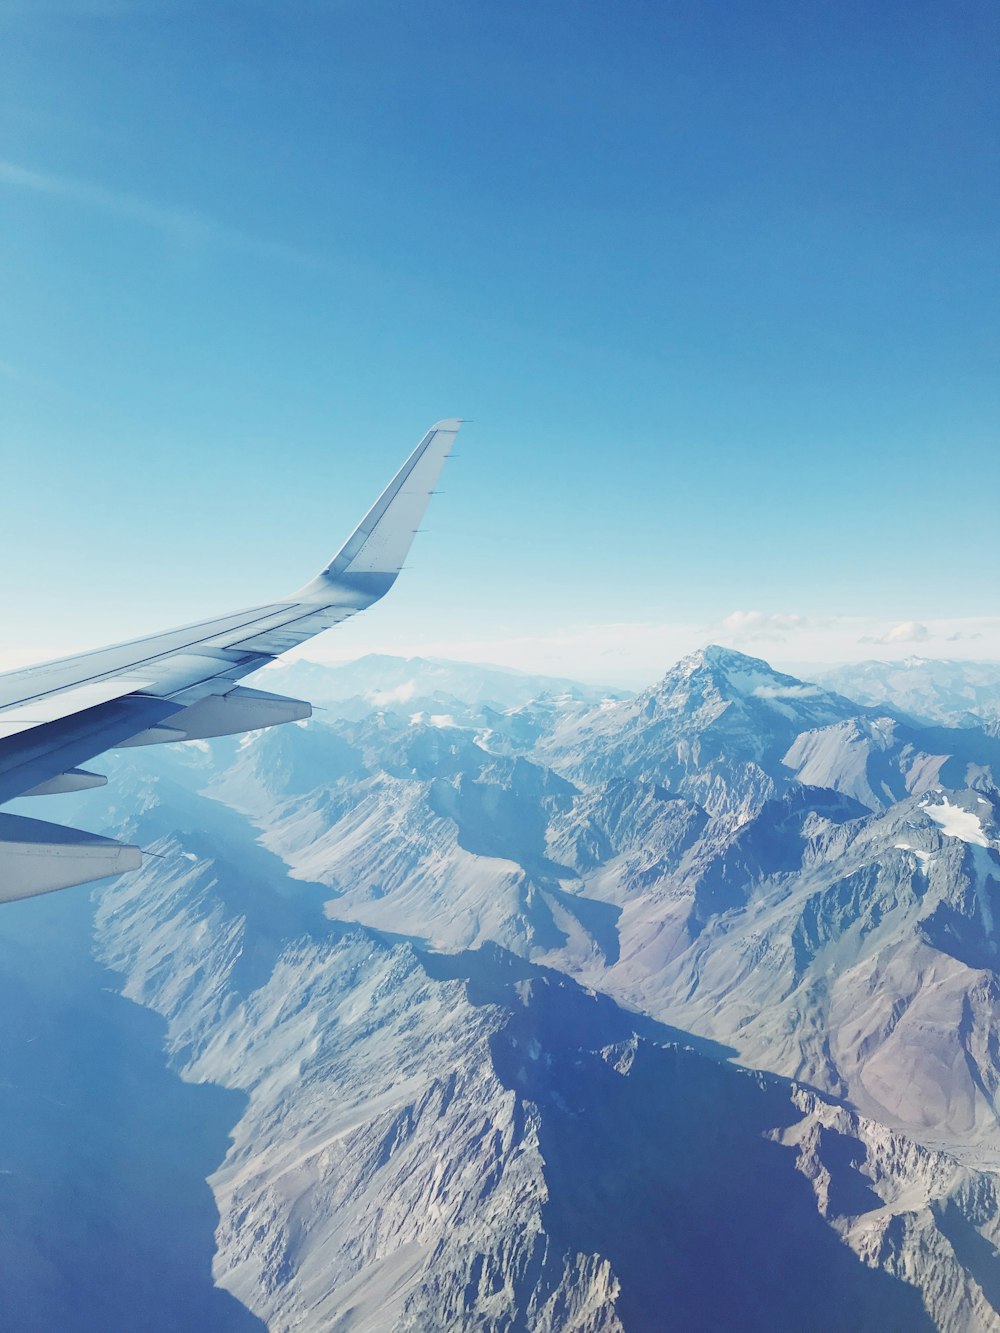 An airplane window with a view of the snow covered mountains photo – Fly  Image on Unsplash